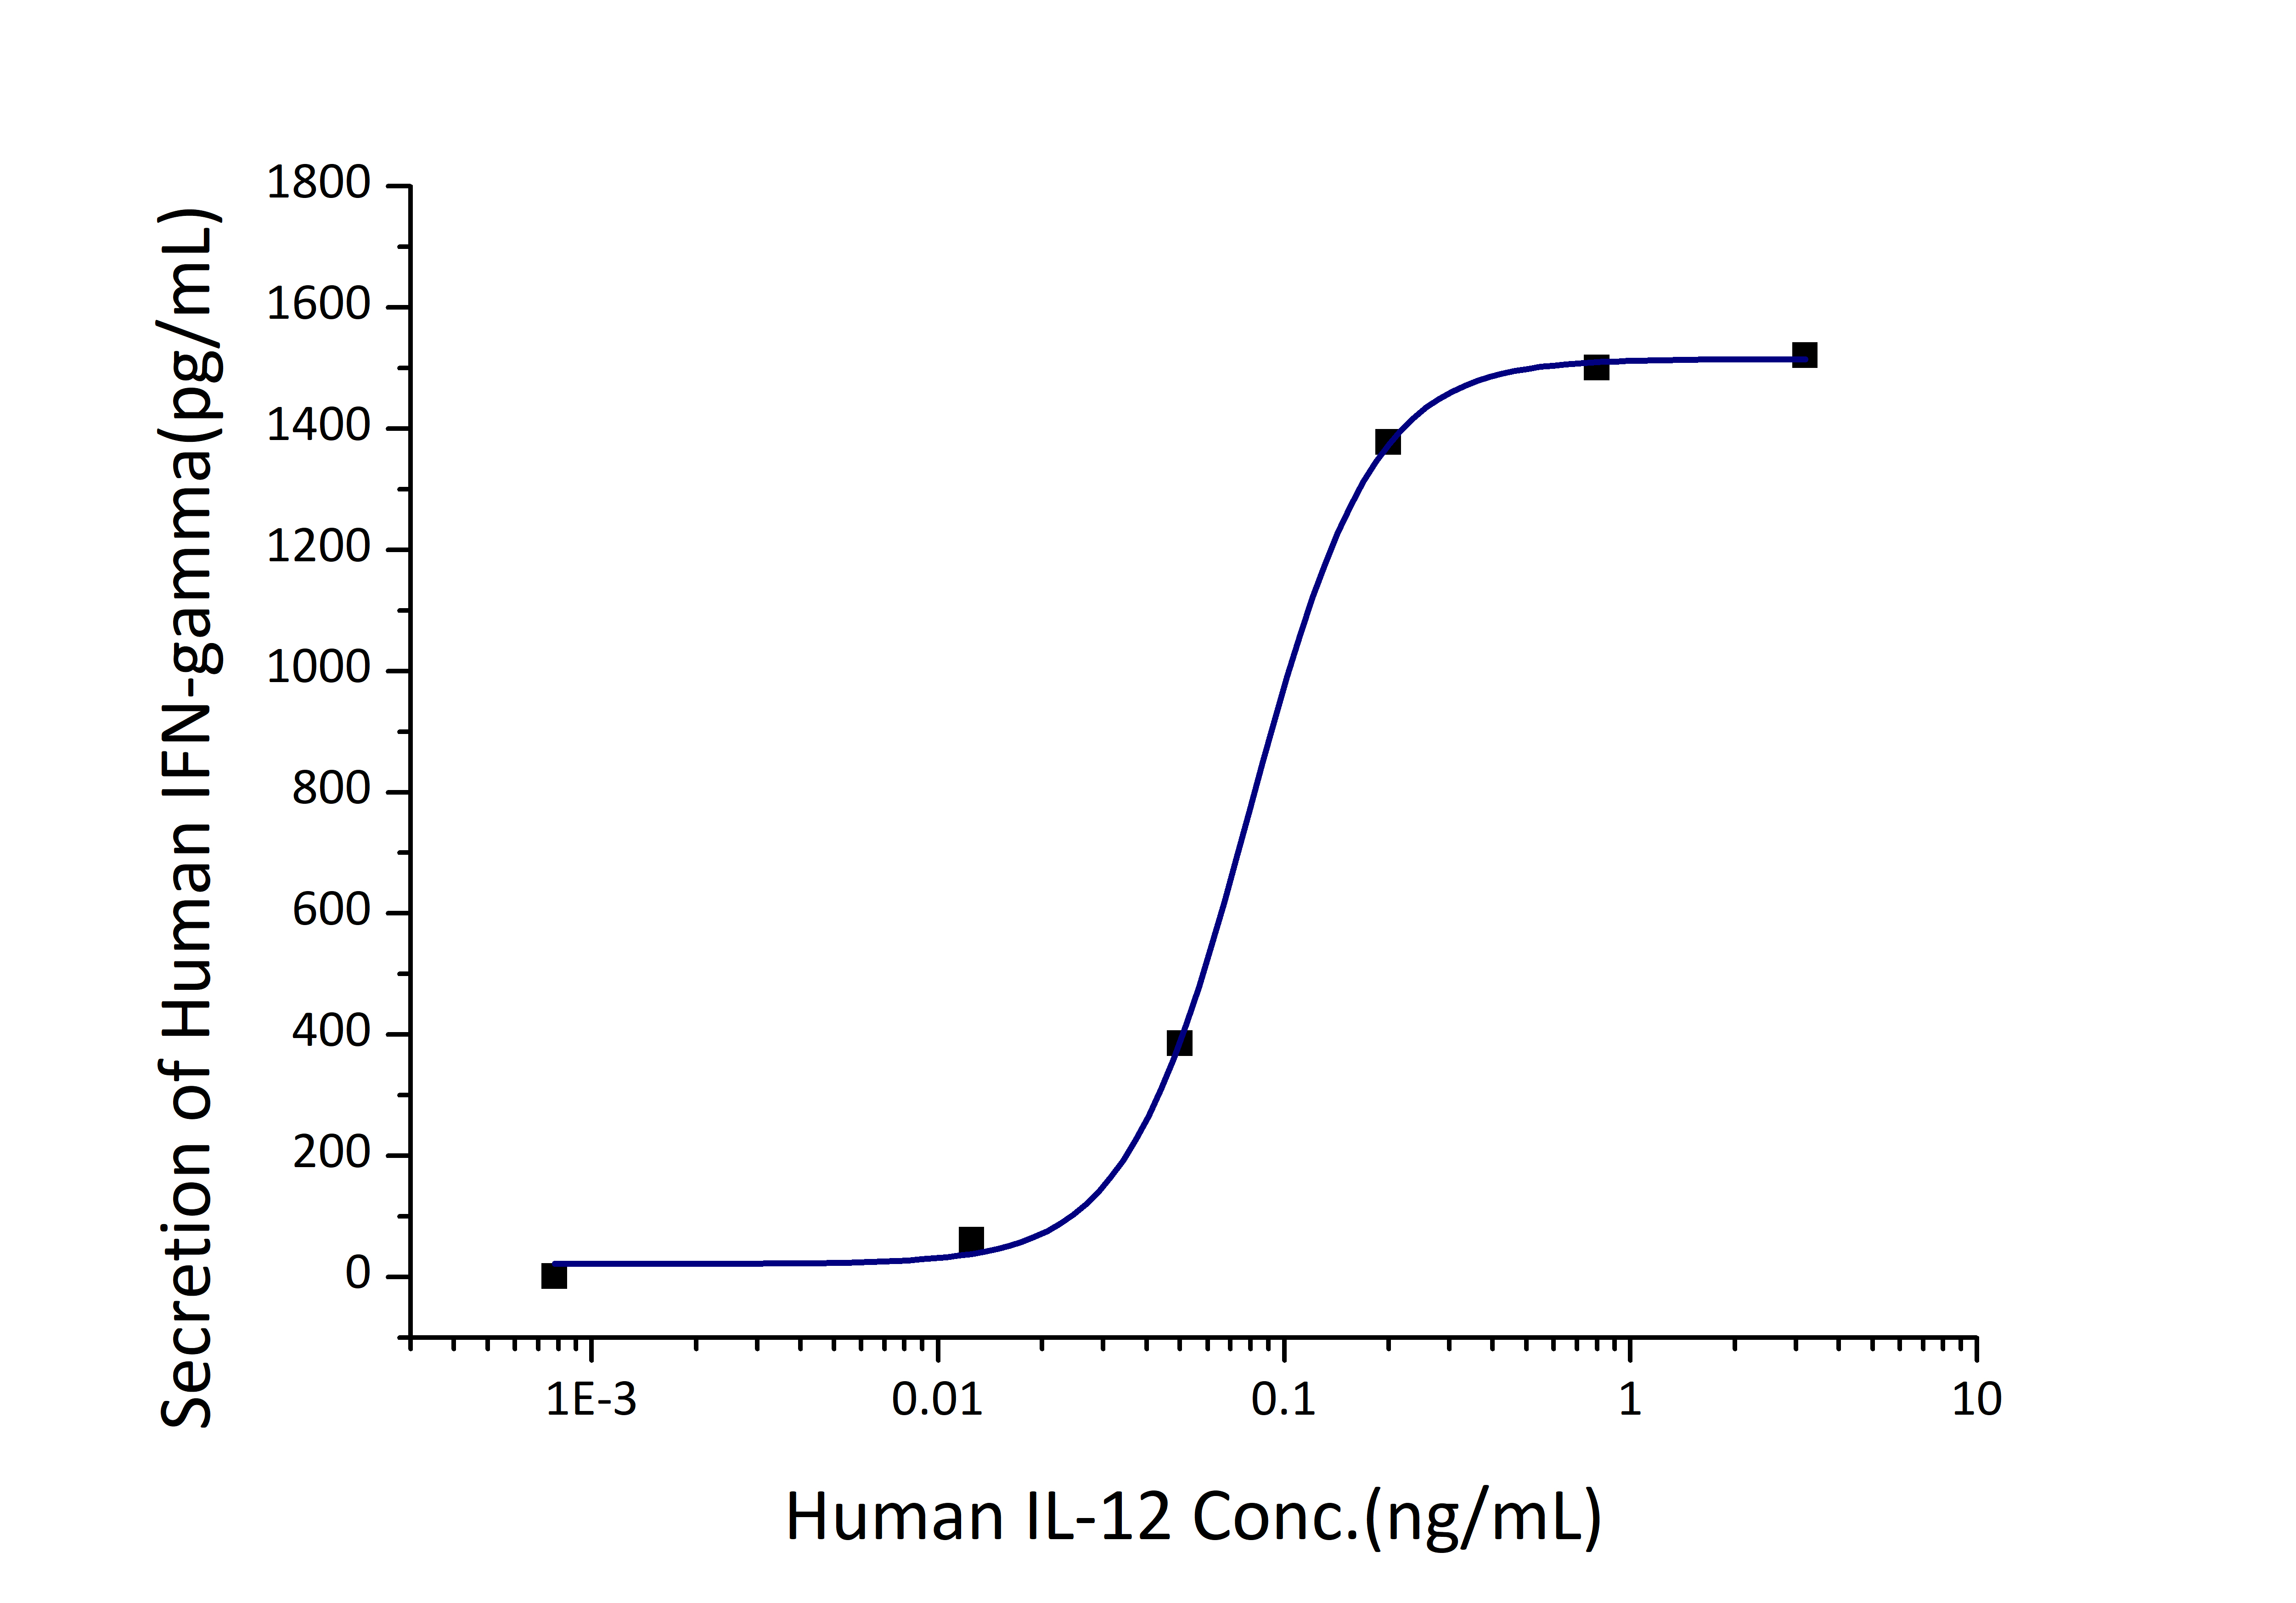 Measured by its ability to induce IFN-gamma secretion in human natural killer lymphoma NK-92 cells. The ED50 for this effect is 0.04-0.16 ng/mL.